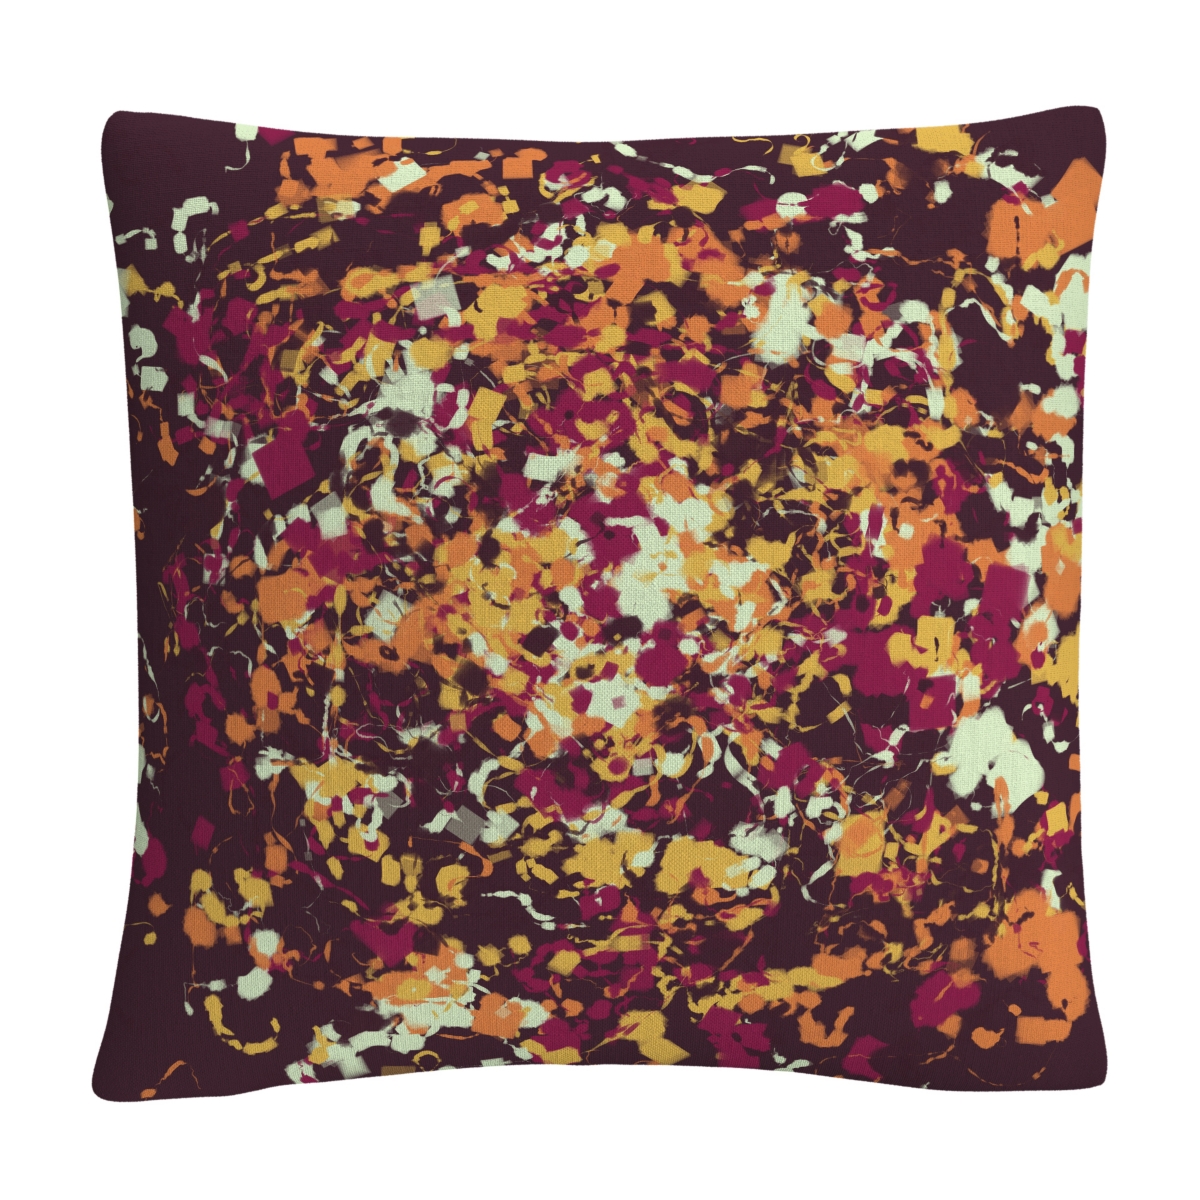 Abc Speckled Colorful Splatter Abstract 6Decorative Pillow, 16 x 16